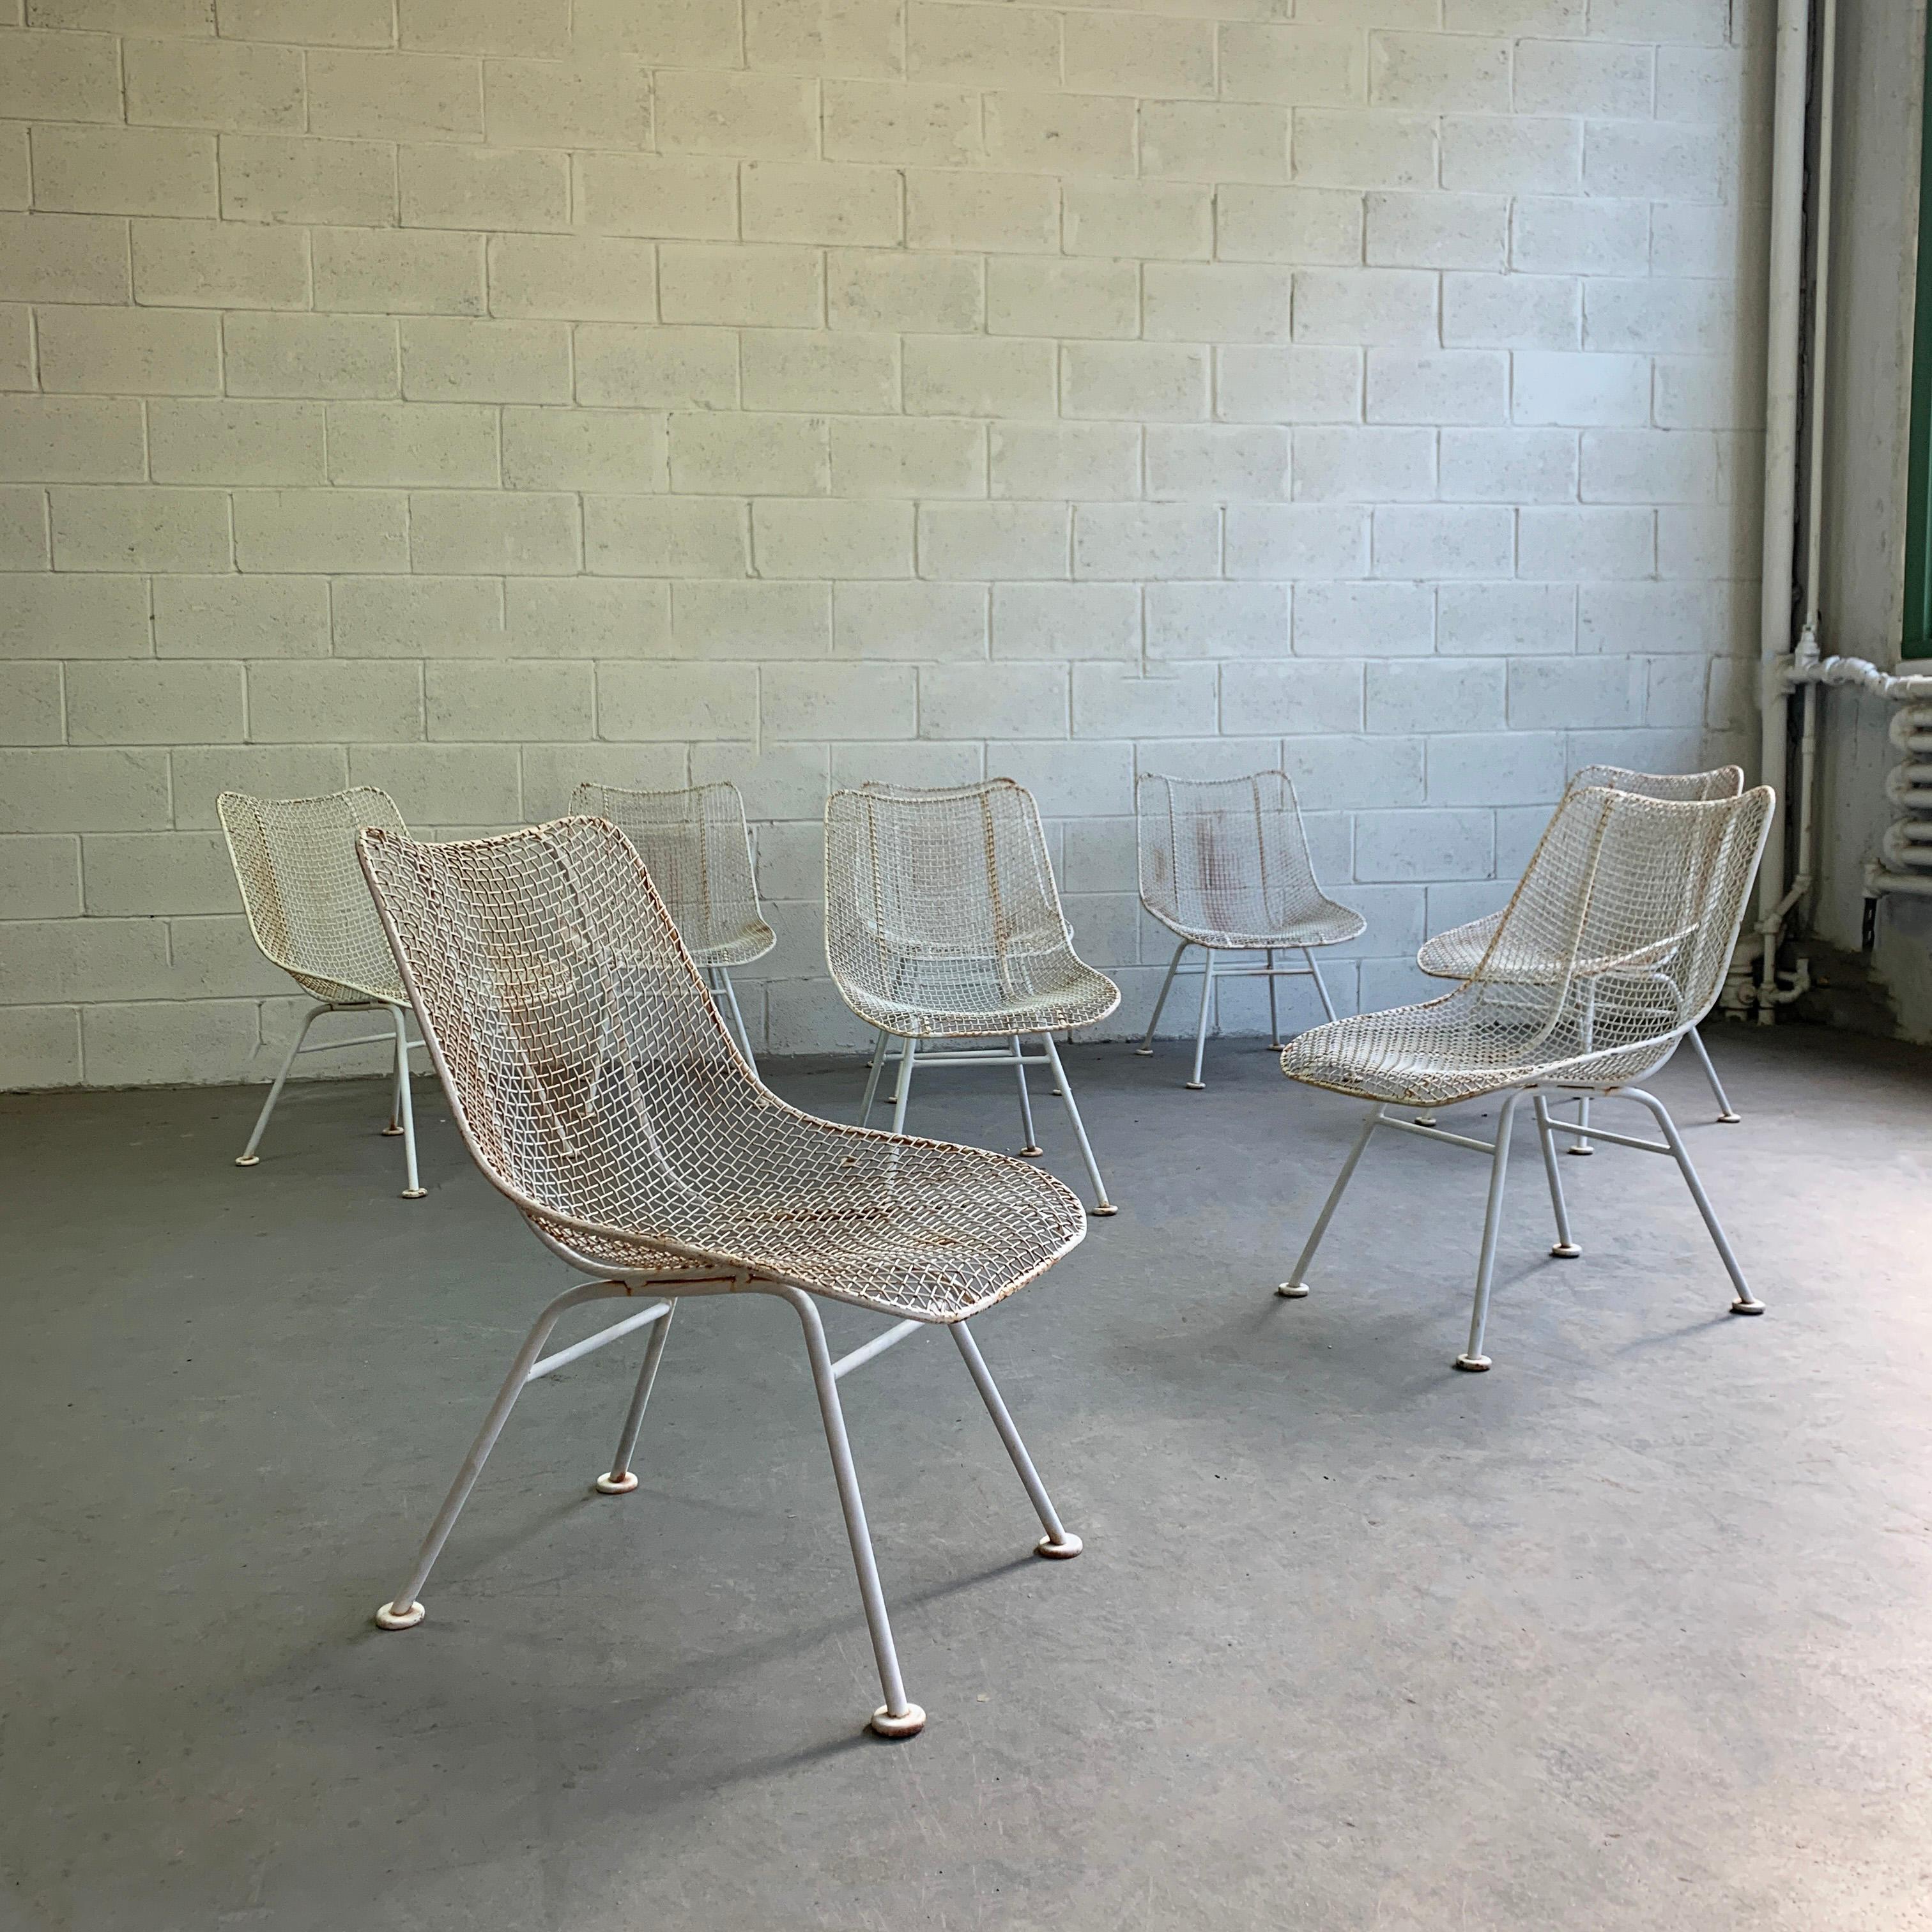 Set of 8, Mid-Century Modern, low, wrought iron mesh and steel, side chairs by Russell Woodard, Sculptura.